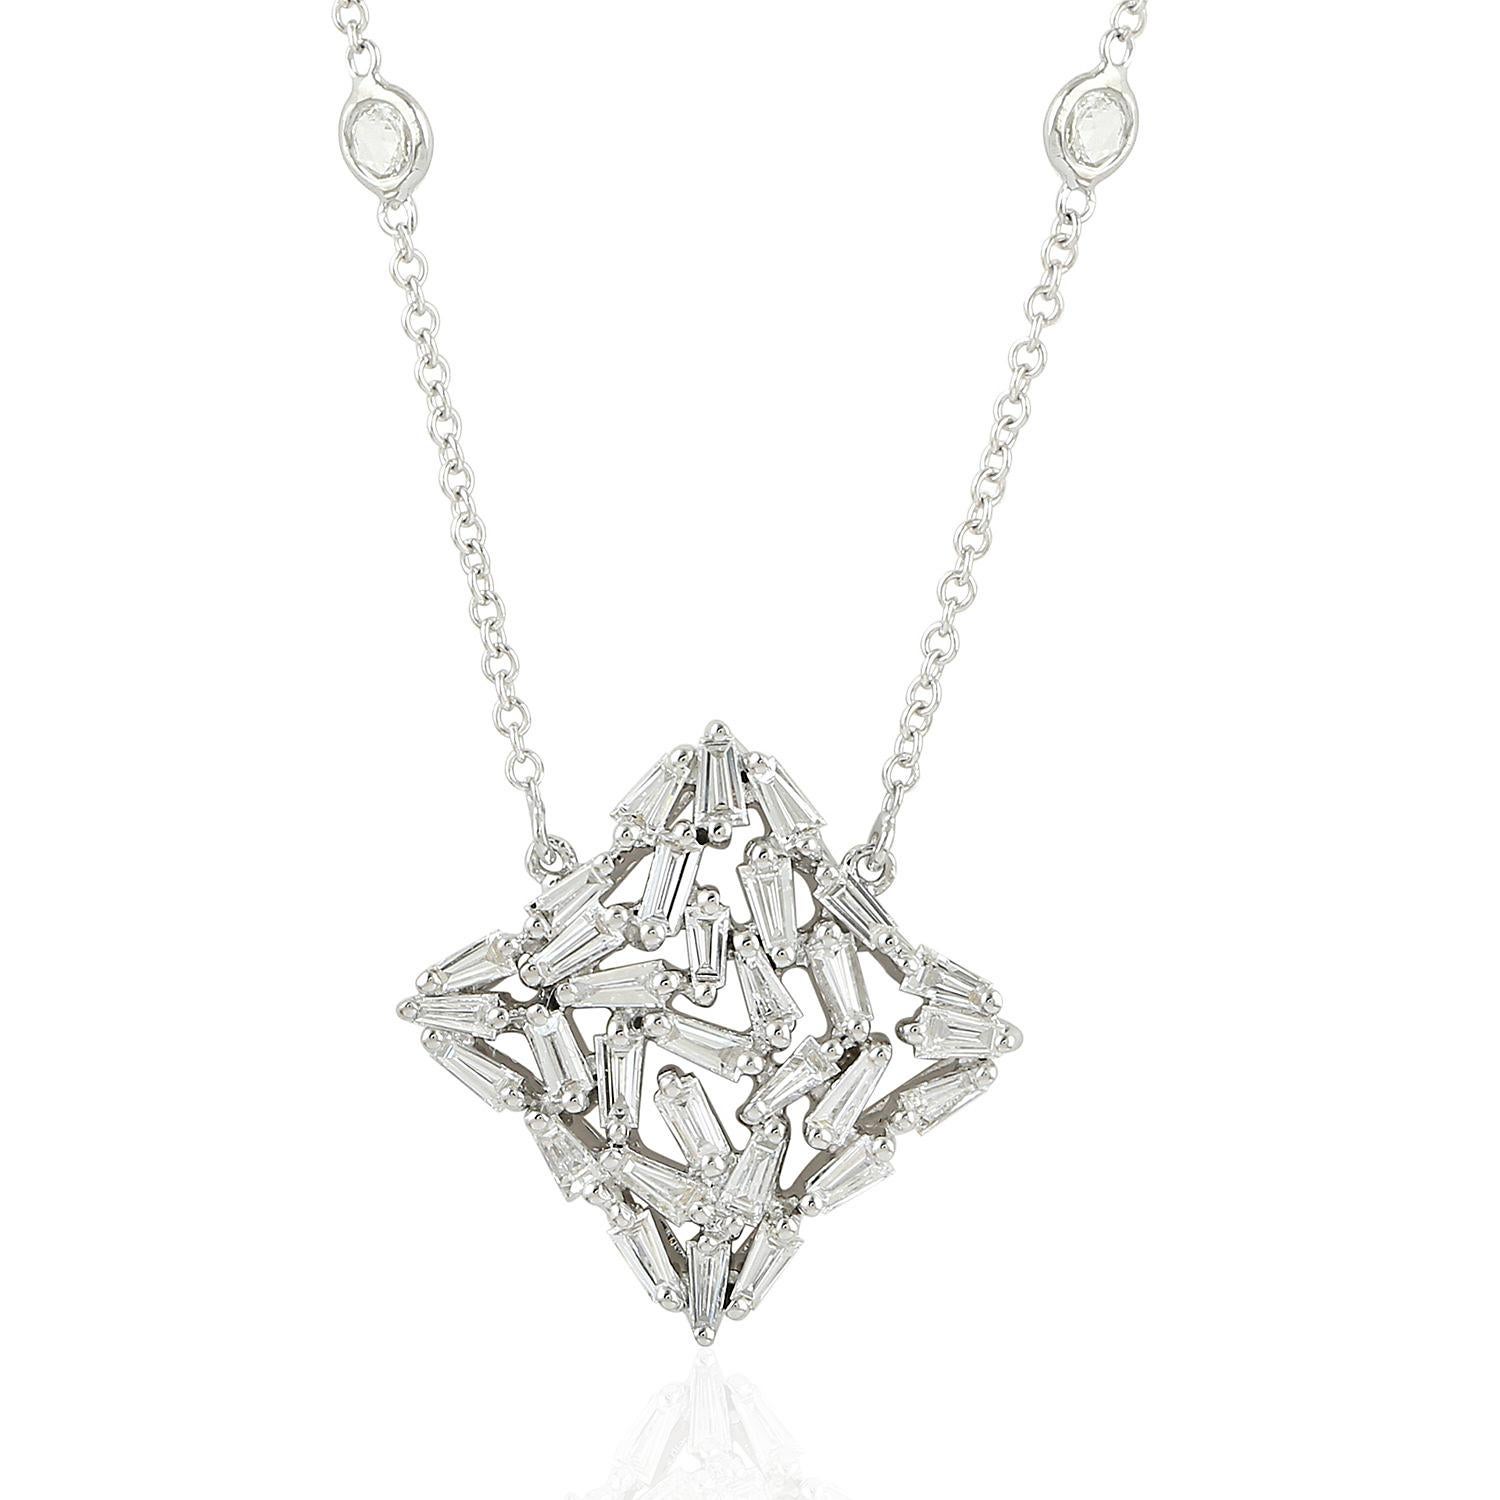 Modern Designer Princess Necklace Made In 18k White Gold With Baguette Diamonds Charm For Sale